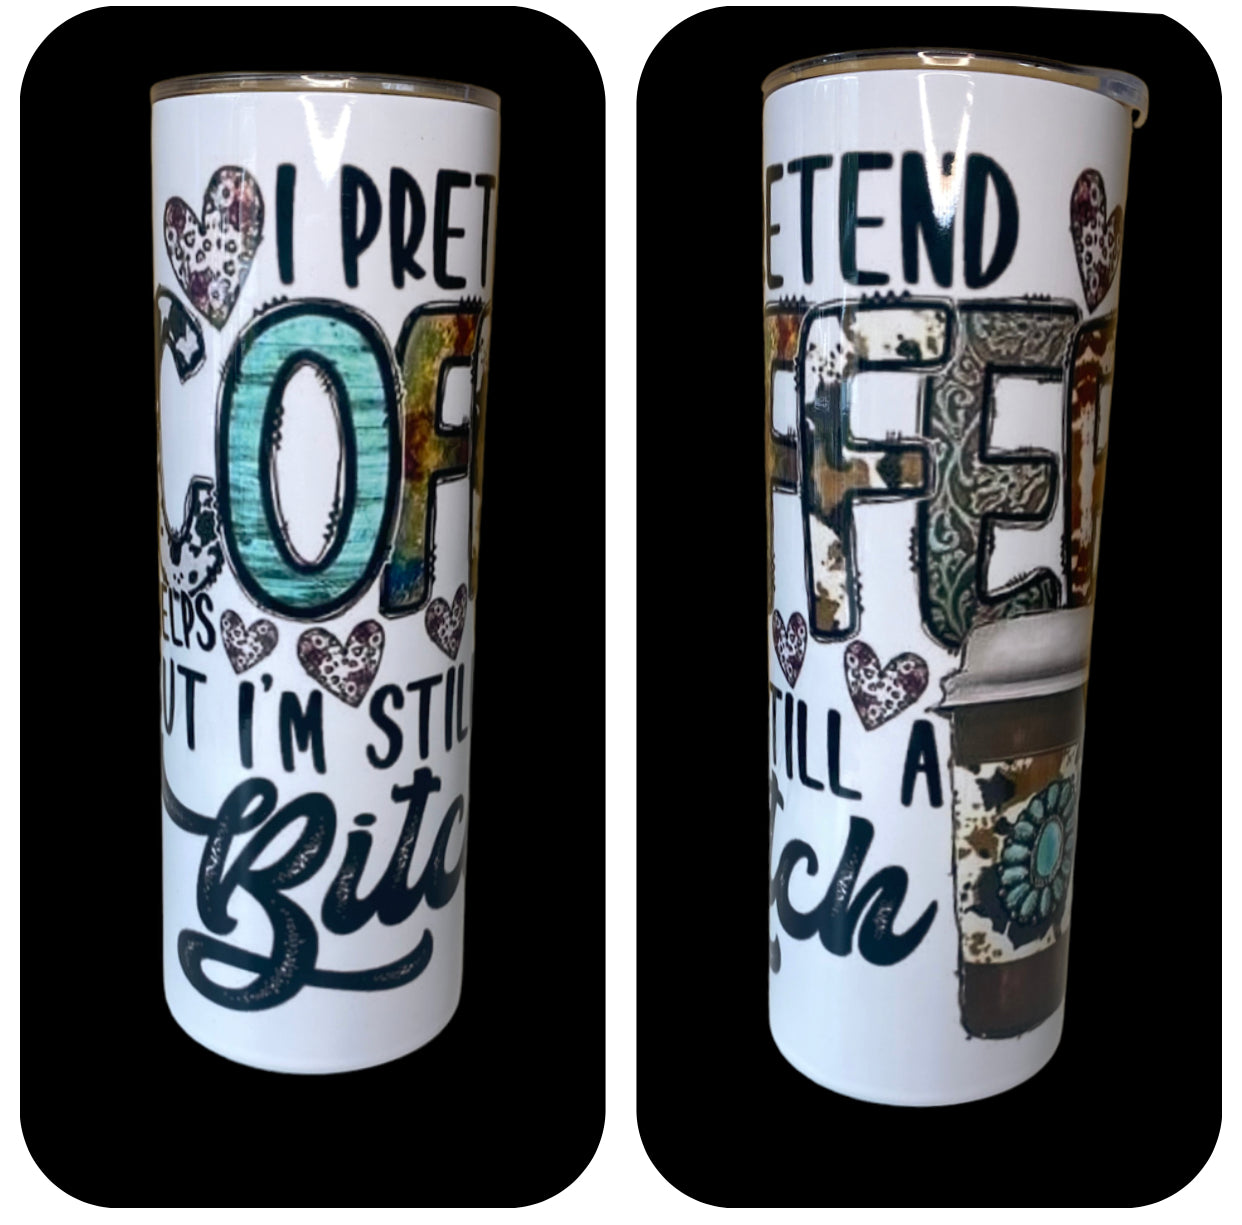 A8101 - I Pretend COFFEE Helps but I'm still a Bitch Tumbler 600ml Stainless Steel Insulated Tumbler